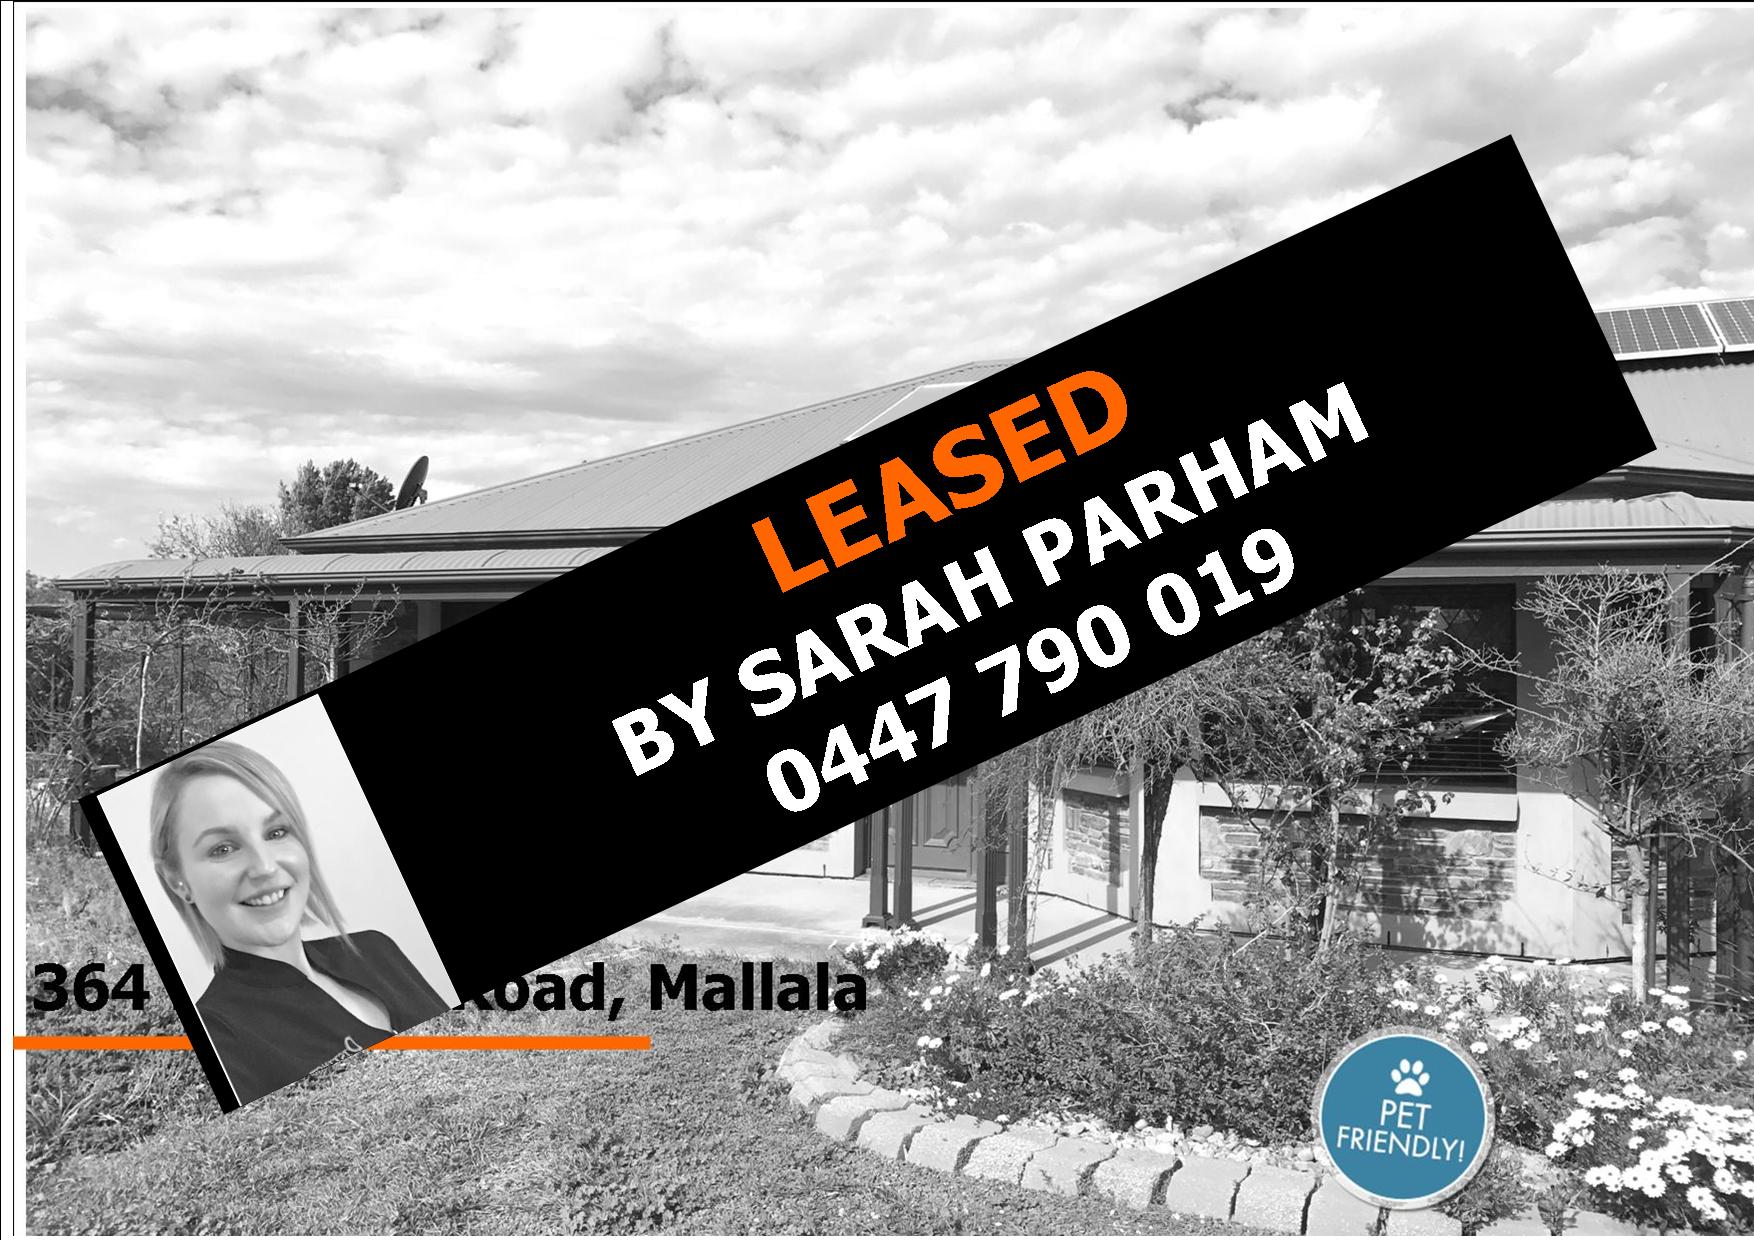 LEASED!  – EXPERIENCE THE DISTINCT DIFFERENCE